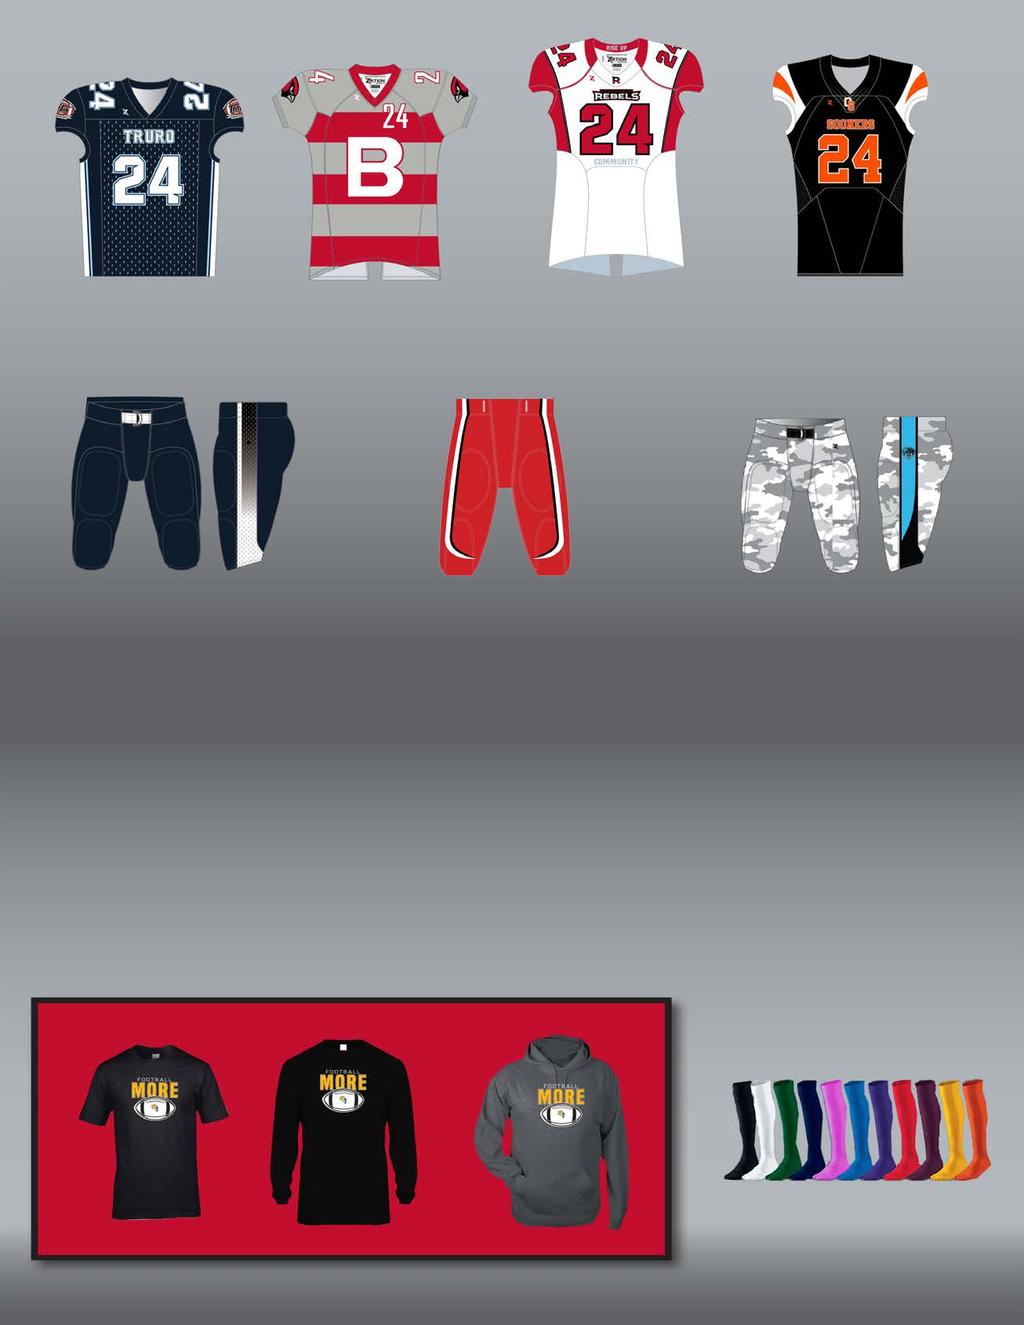 98 ORDER 40(MIN) XRTION JERSEYS, PANTS AND SOCKS AND RECEIVE THE SAME QUANTITY BADGER 5100 C2 TEE AND 6 COACHES PACKS